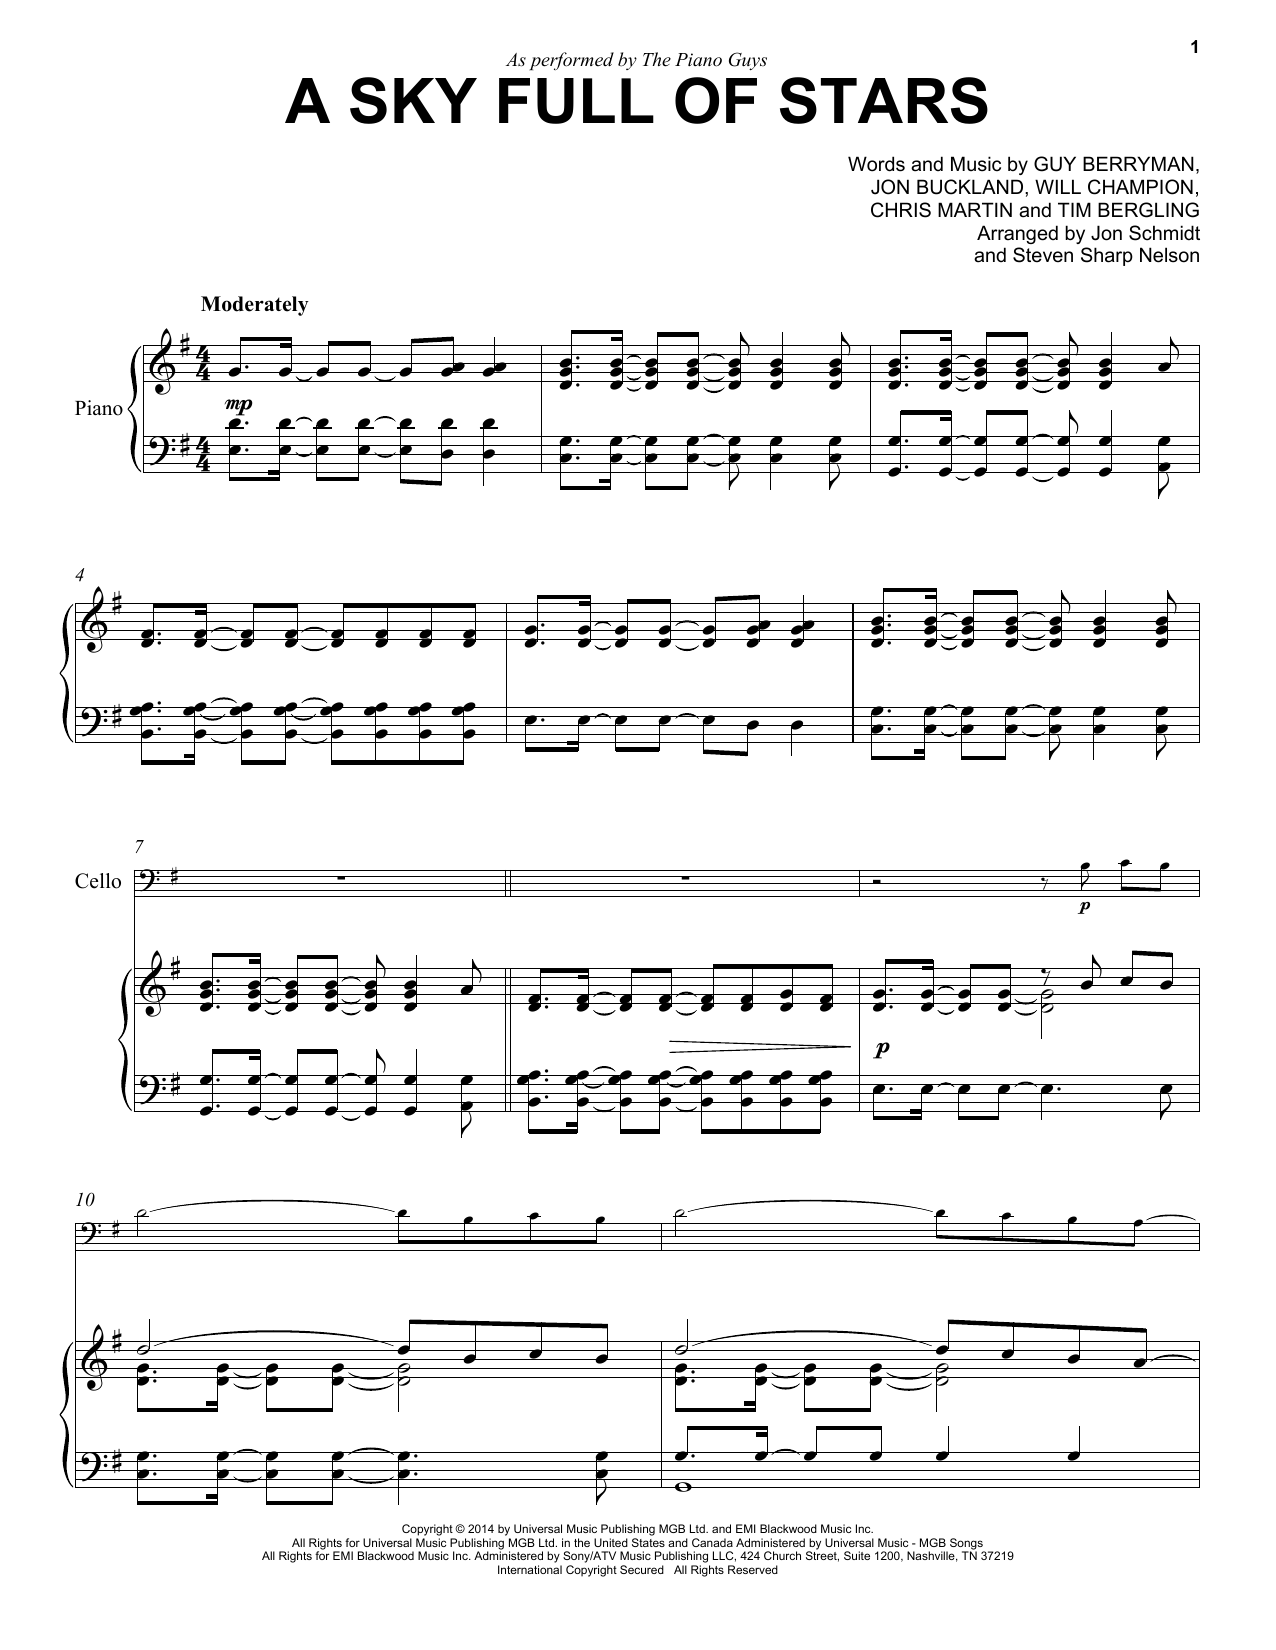 Download The Piano Guys A Sky Full Of Stars Sheet Music